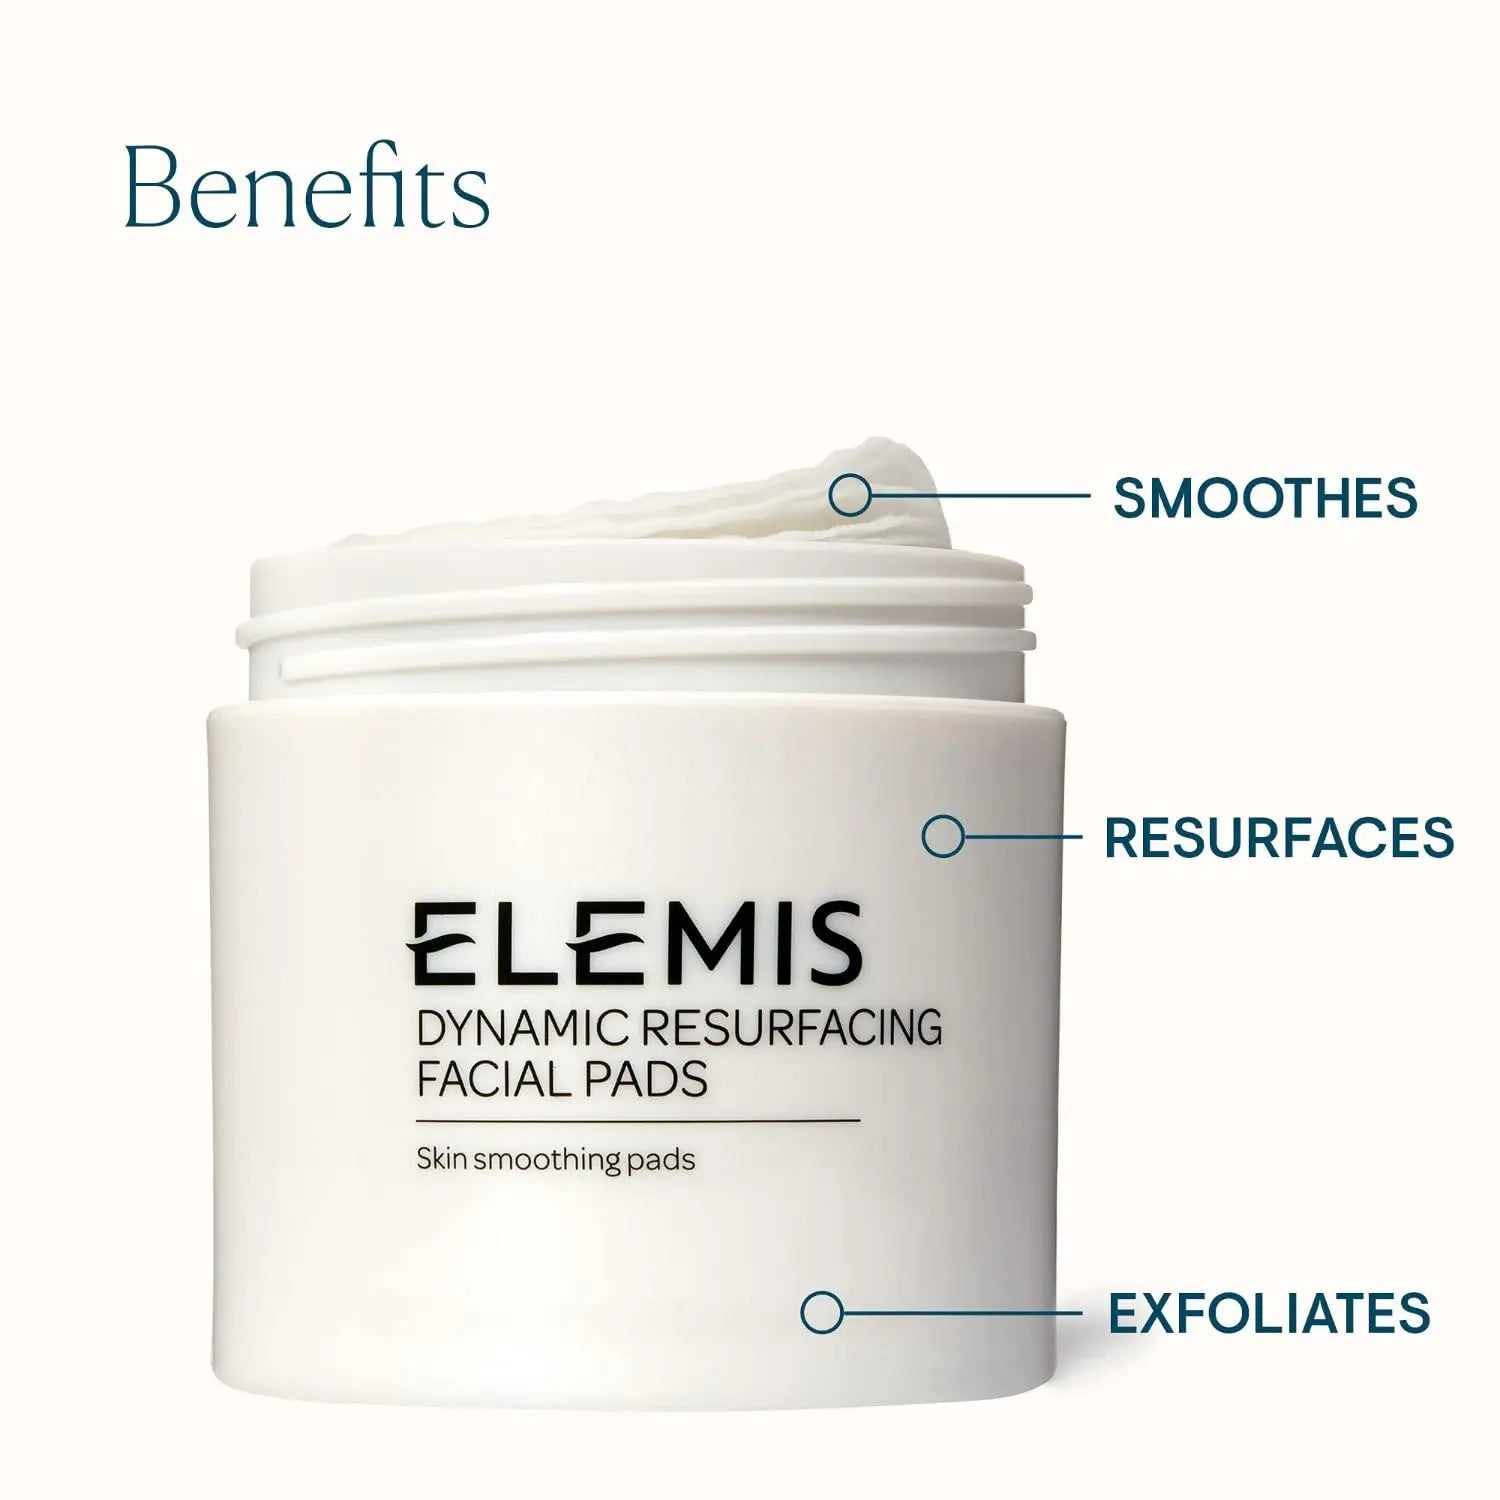 ELEMIS Dynamic Resurfacing Facial Pads | Gentle Dual-Action Textured Treatment Pads Conveniently Smooth, Resurface, and Exfoliate Skin | 60 Count